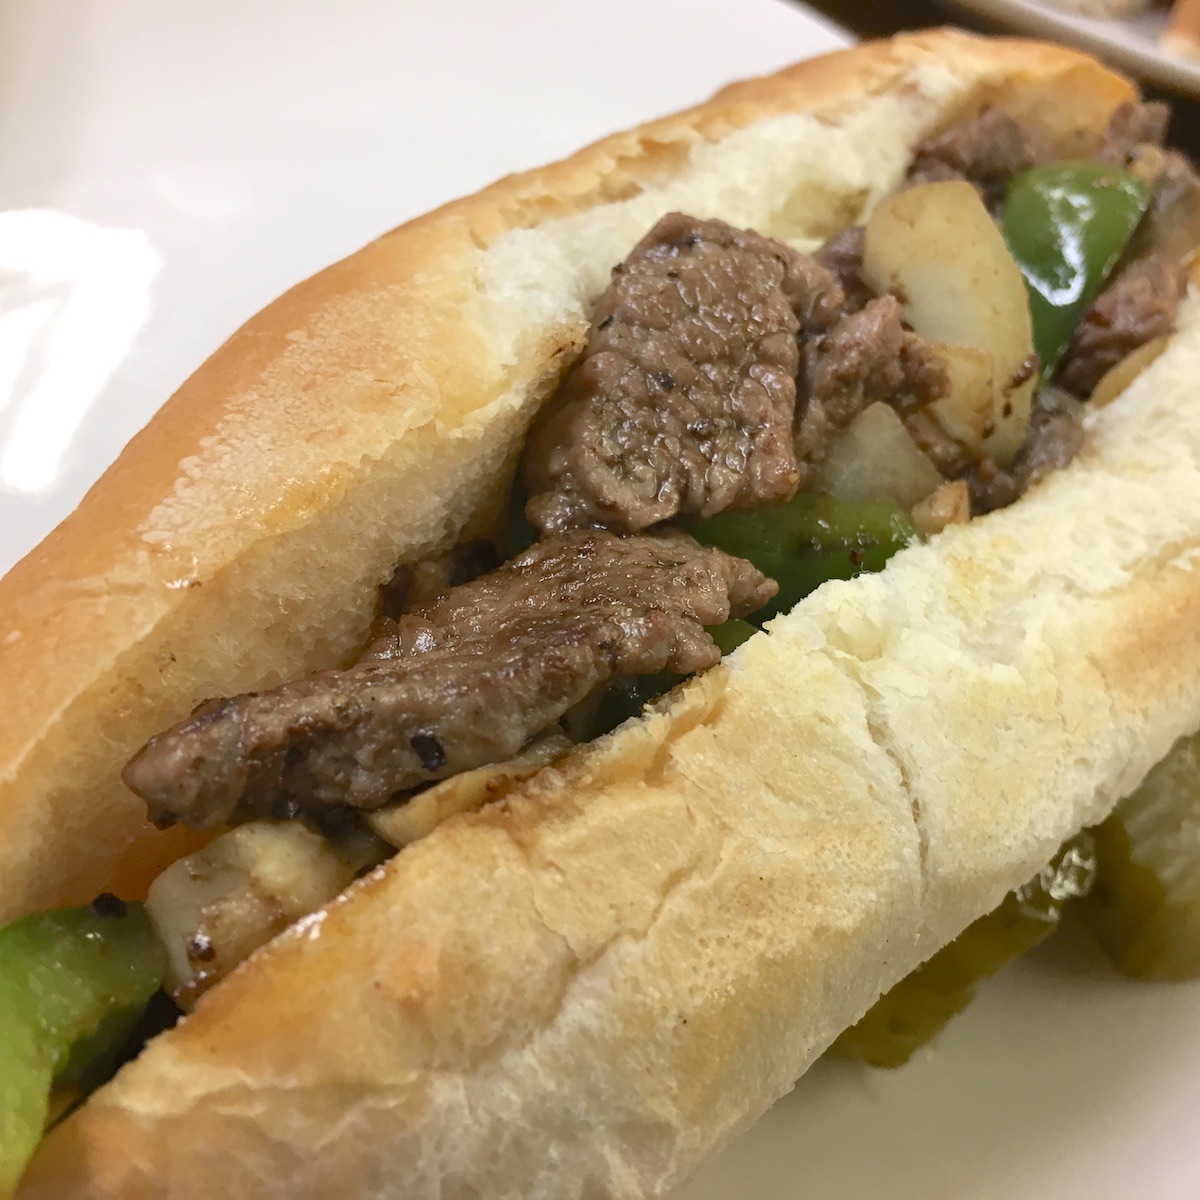 Cheesesteak from Pinegrove Market and Deli in Jacksonville, Florida